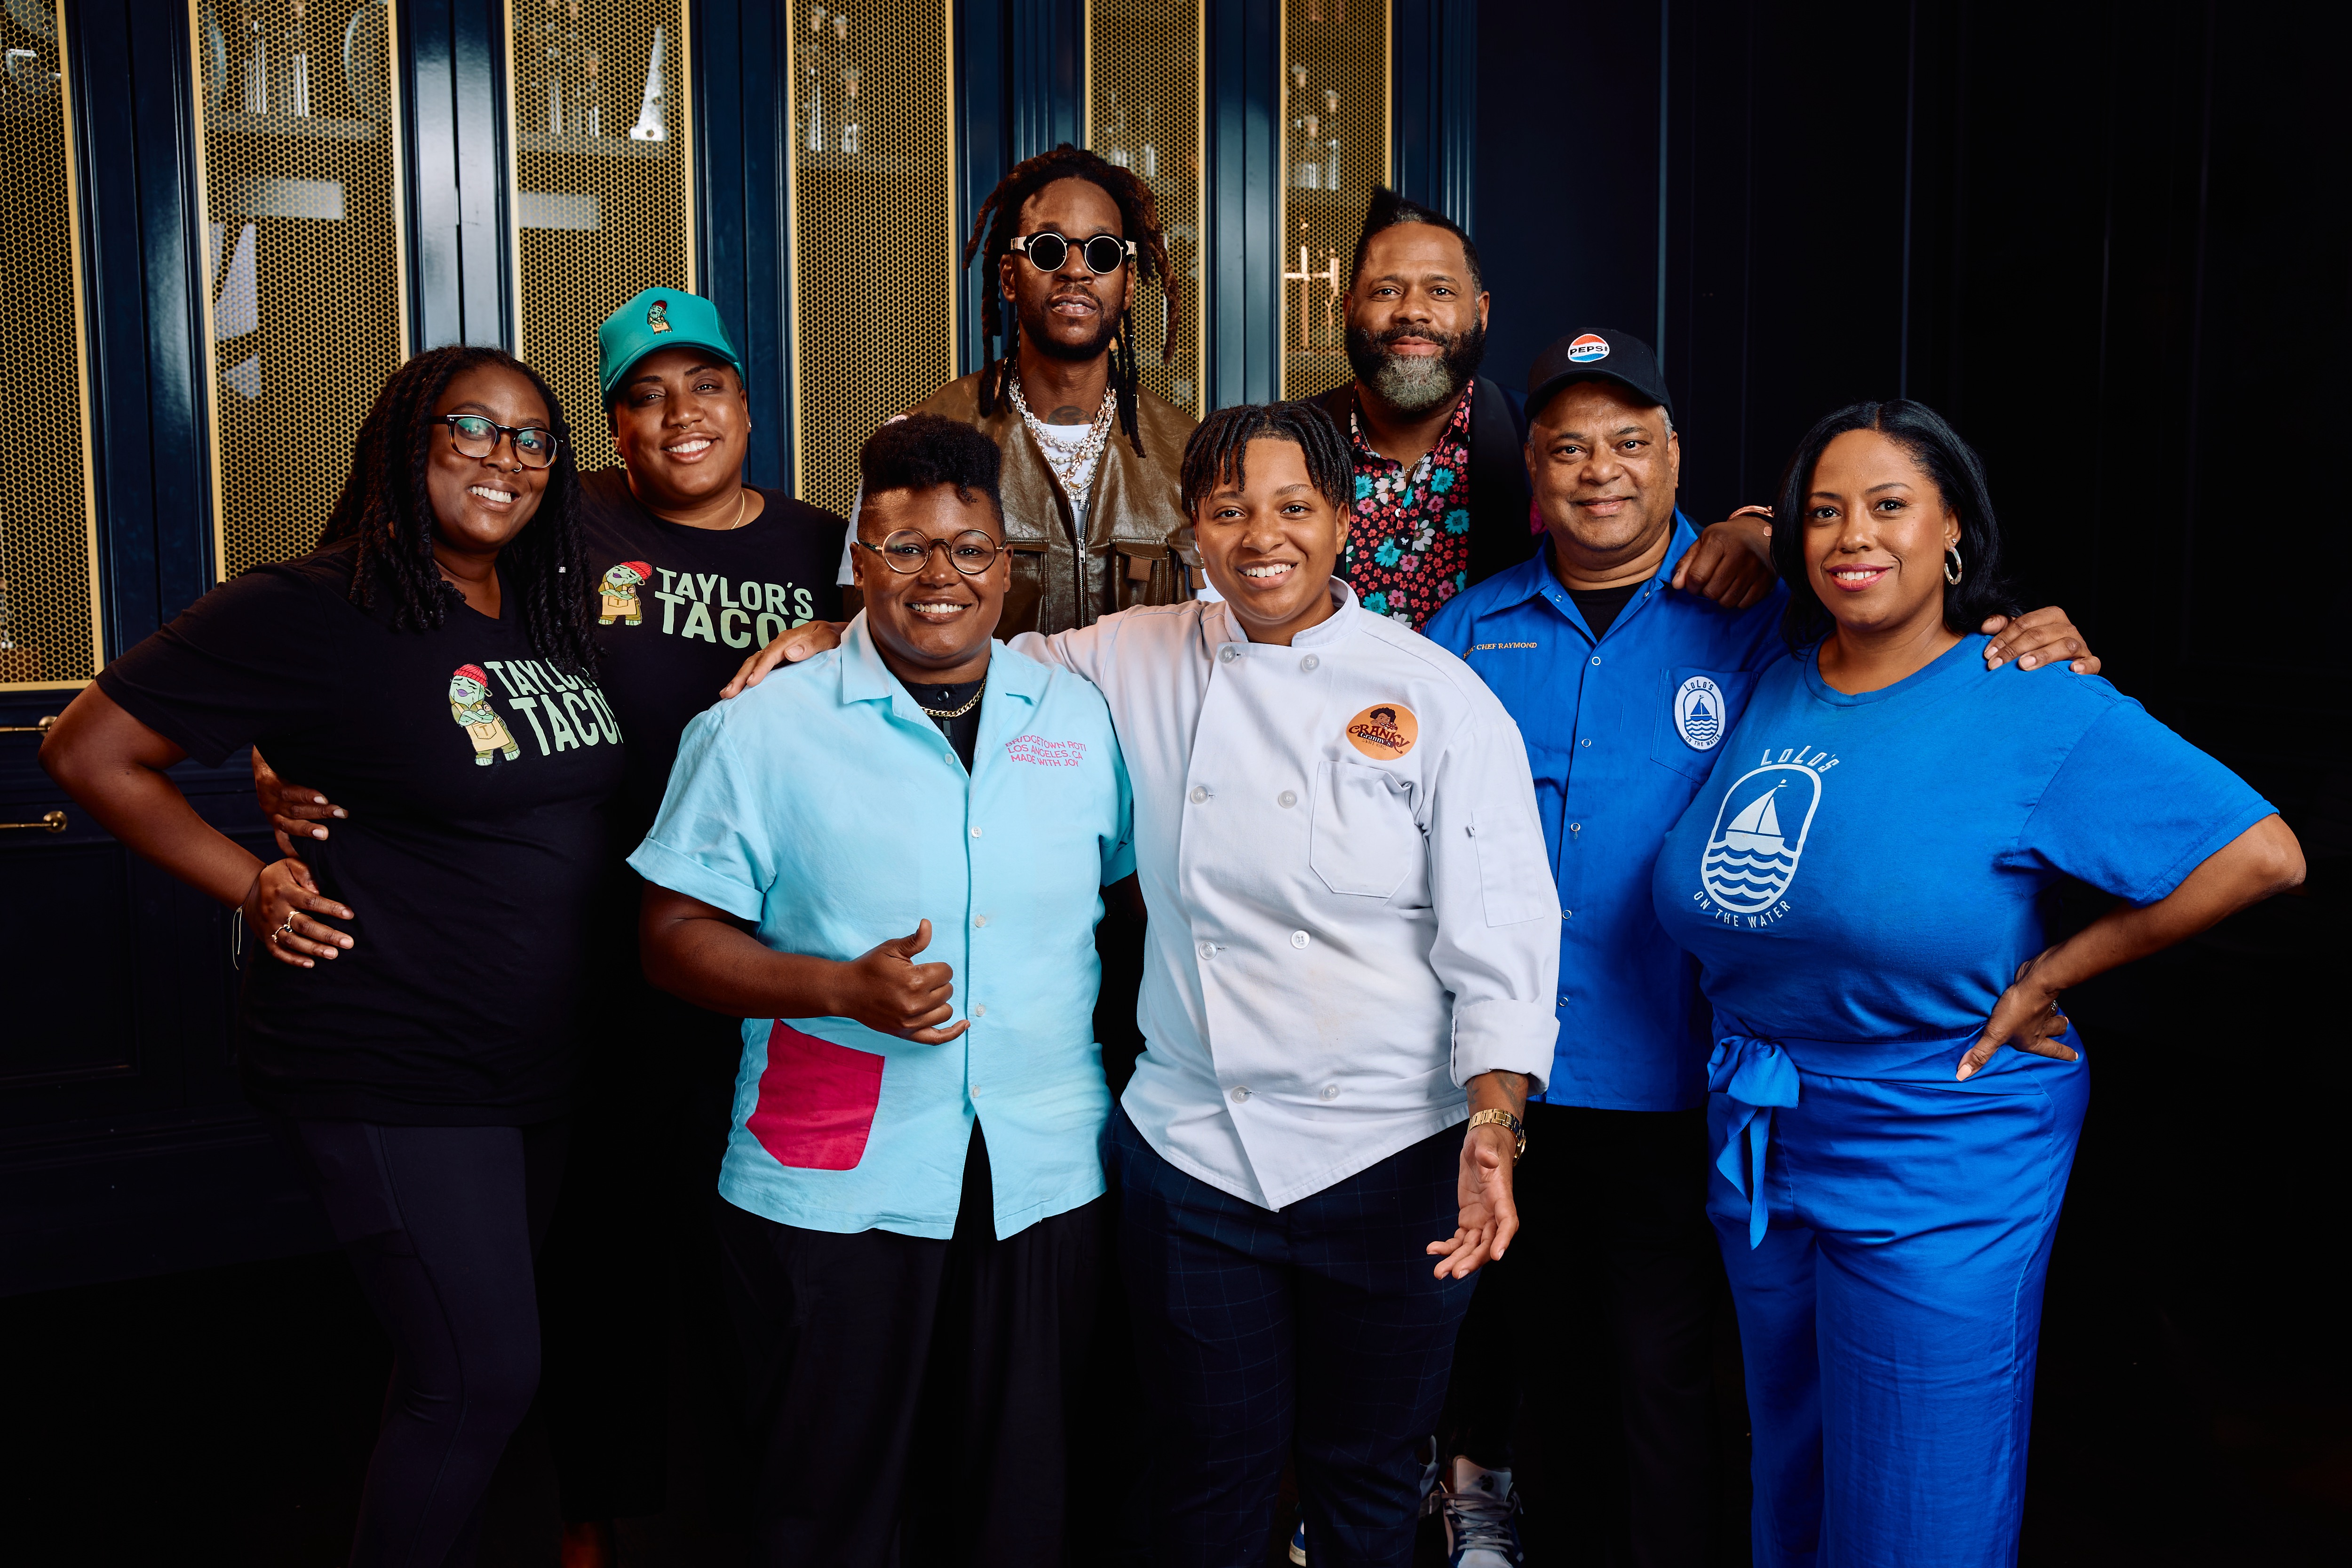 2 Chainz Restaurant To Be Featured In Pepsi Dig In Las Vegas Residency